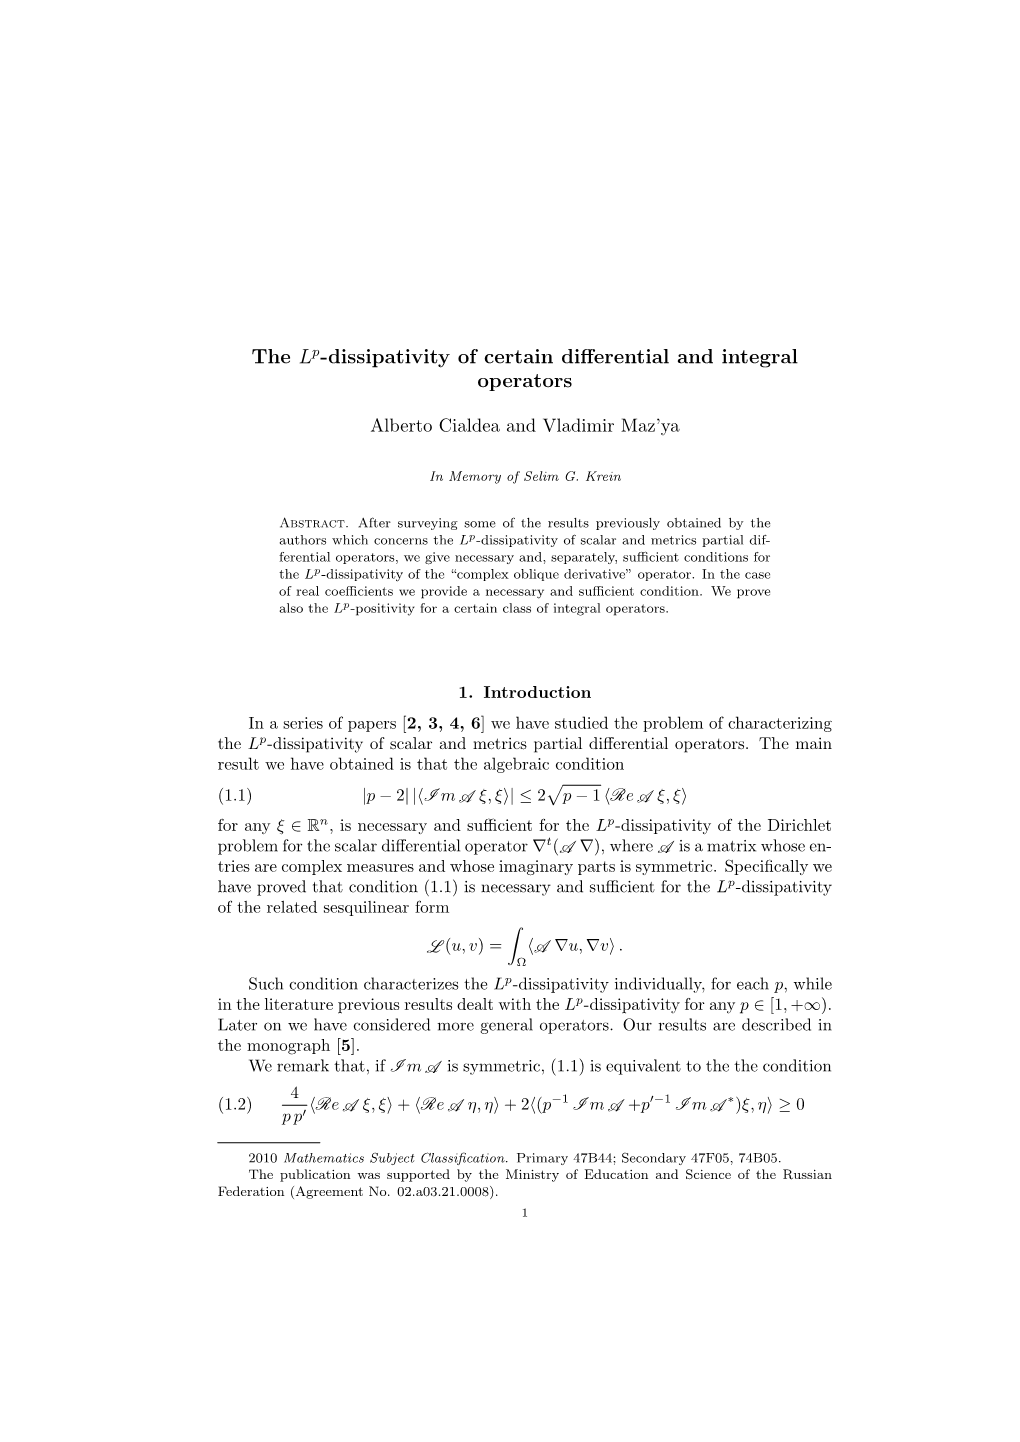 THE Lp-DISSIPATIVITY of CERTAIN DIFFERENTIAL and INTEGRAL OPERATORS 3